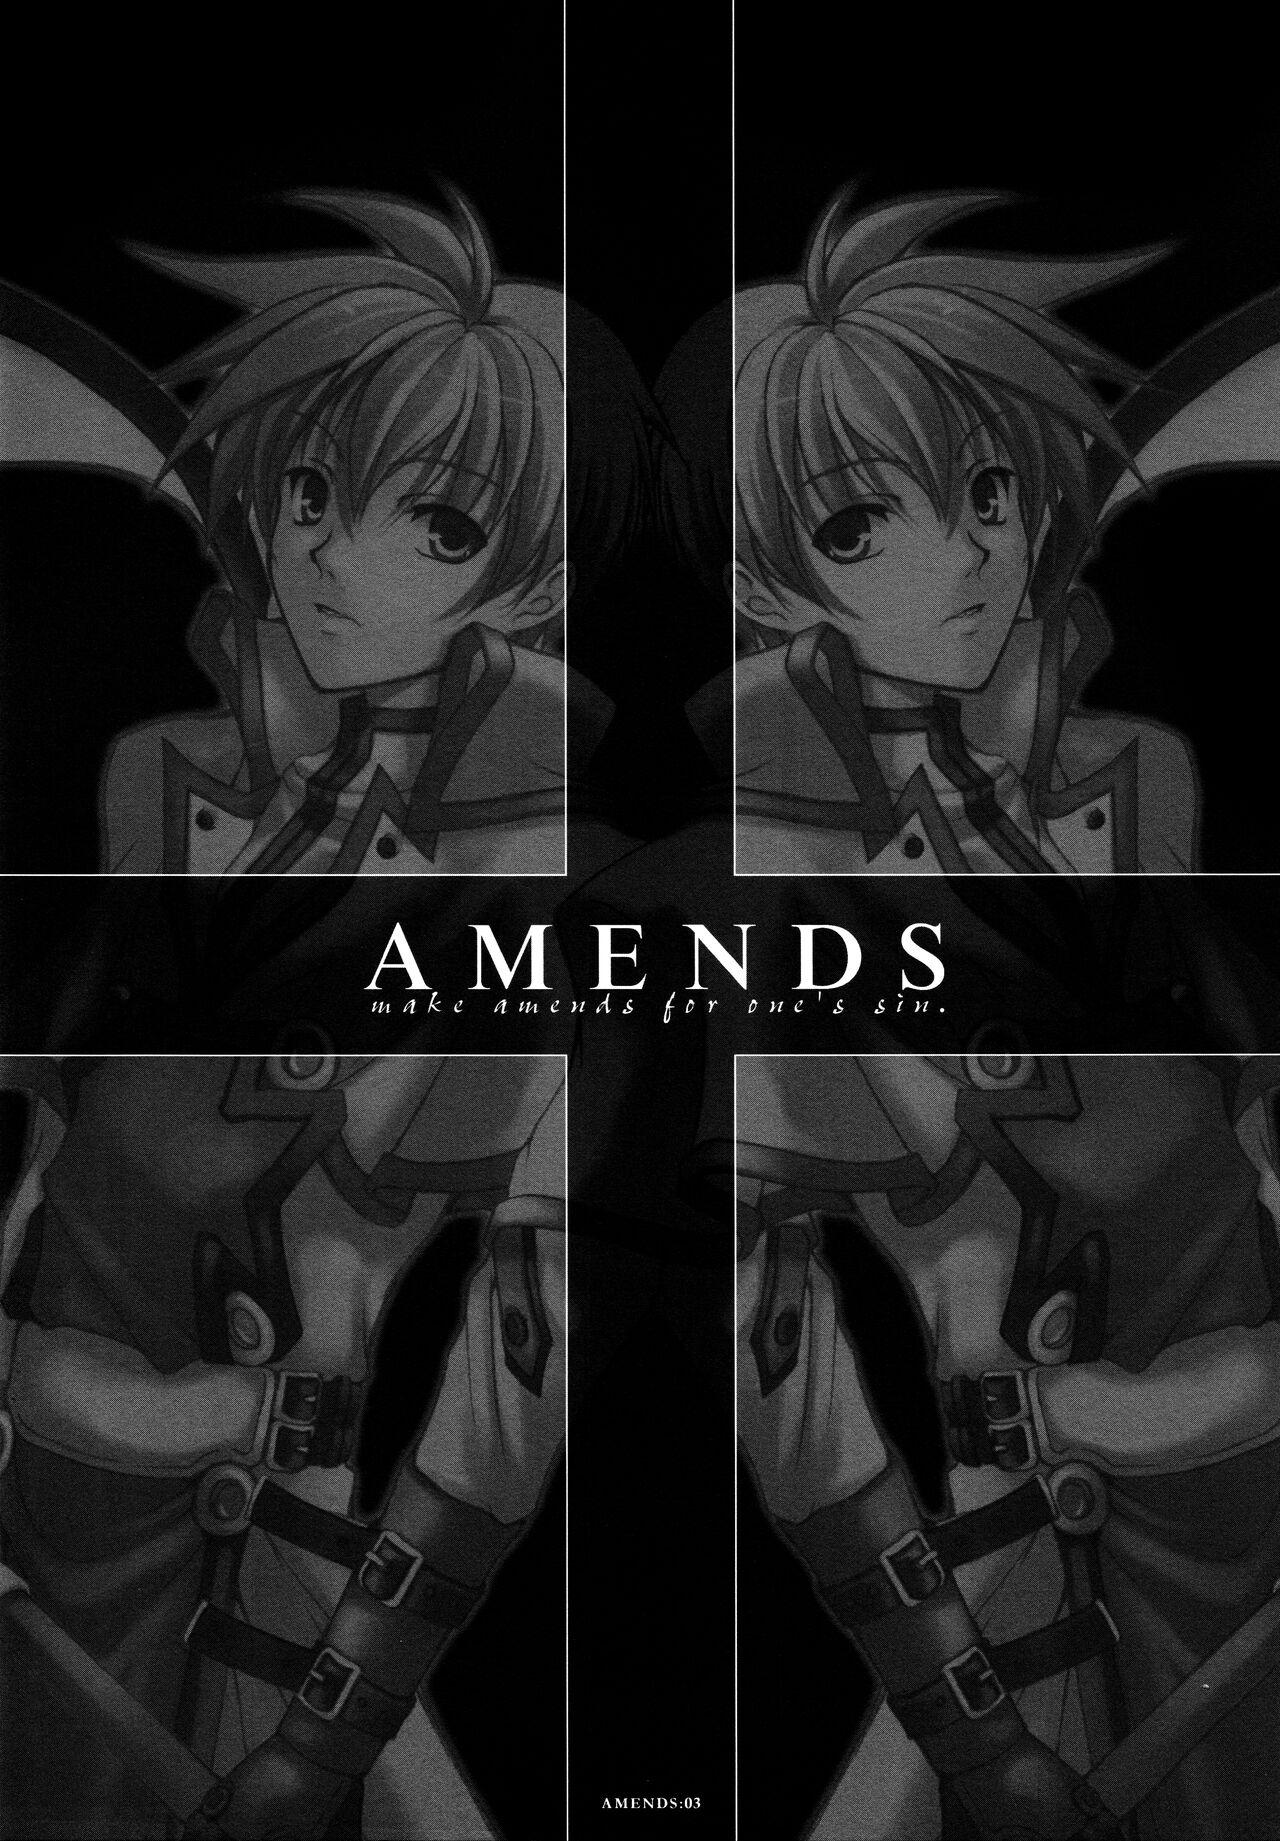 AMENDS - make amends for one's sin. 2